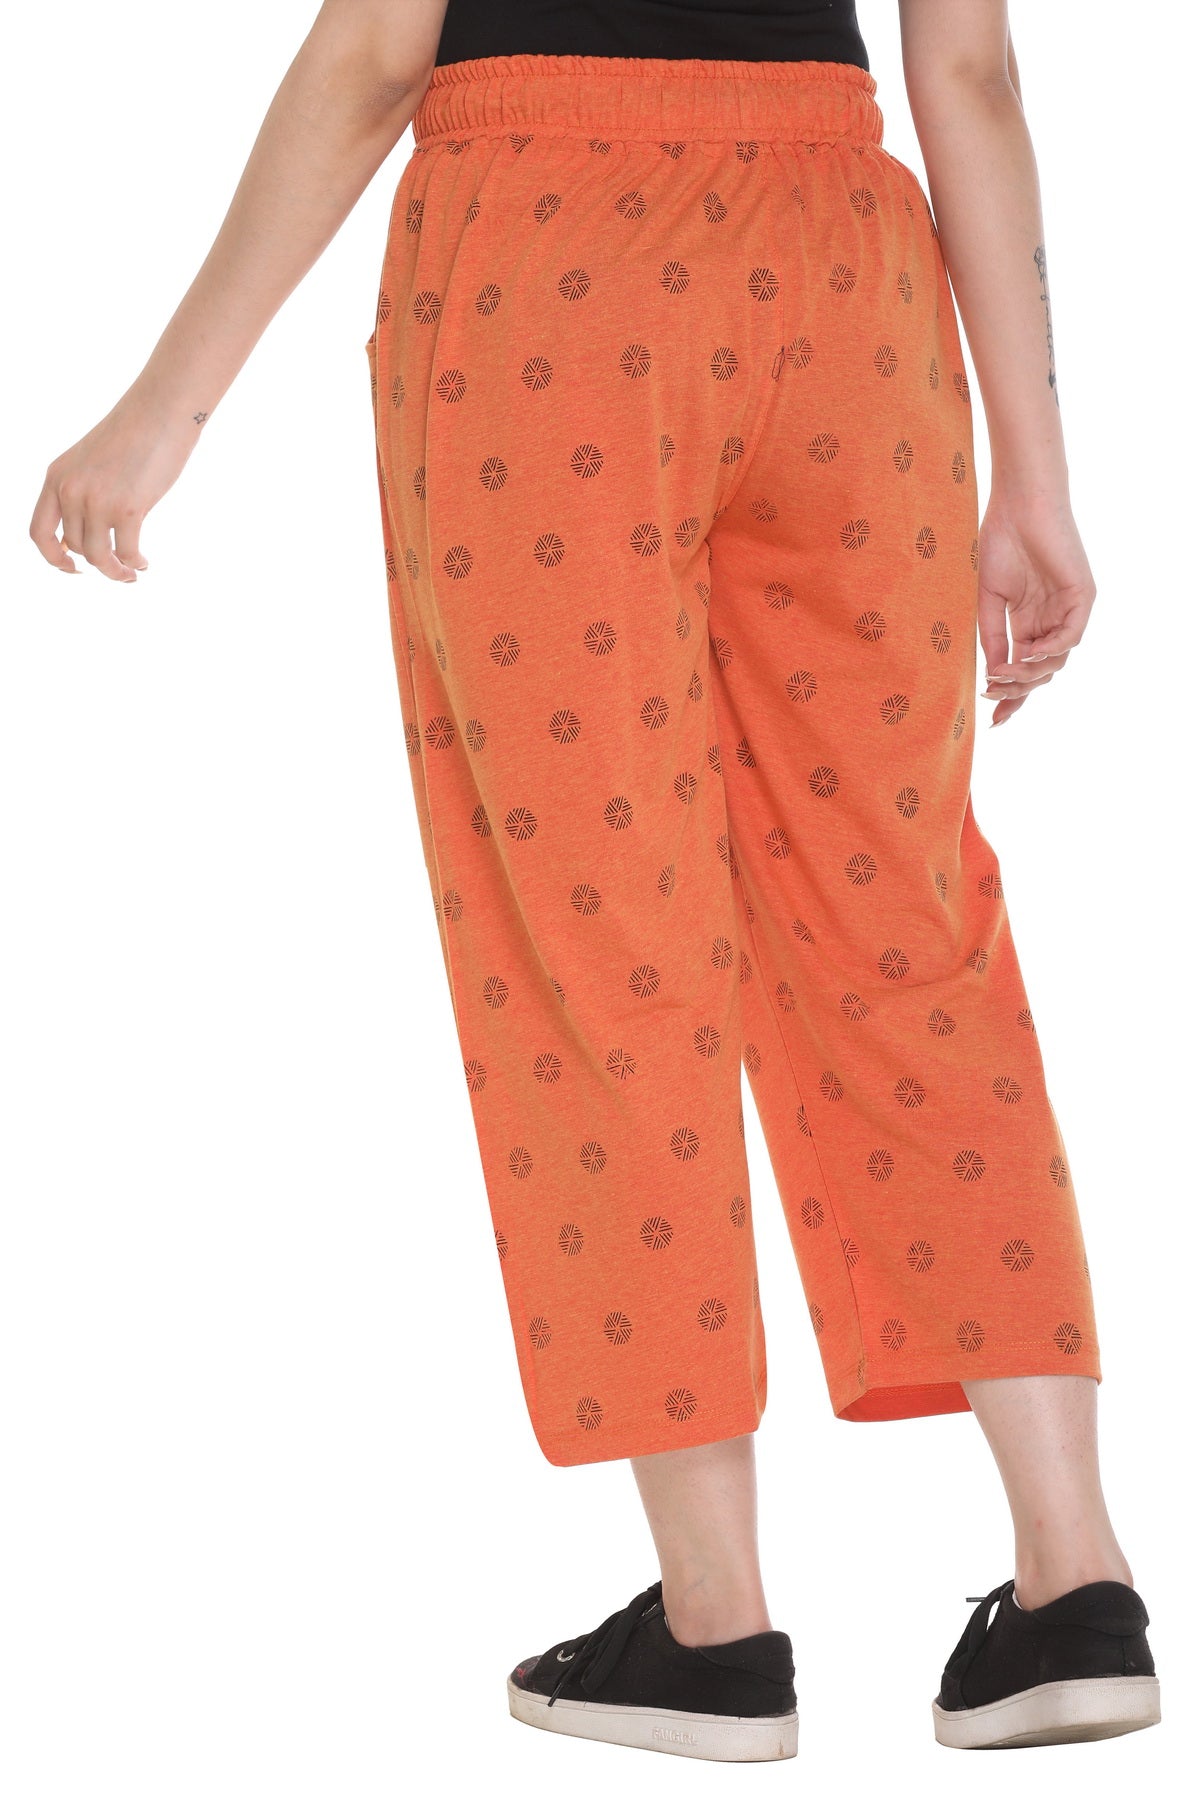 Plus Size Cupid Printed Cotton Capris For Girls/Women - Rust Orange freeshipping - Cupid Clothings